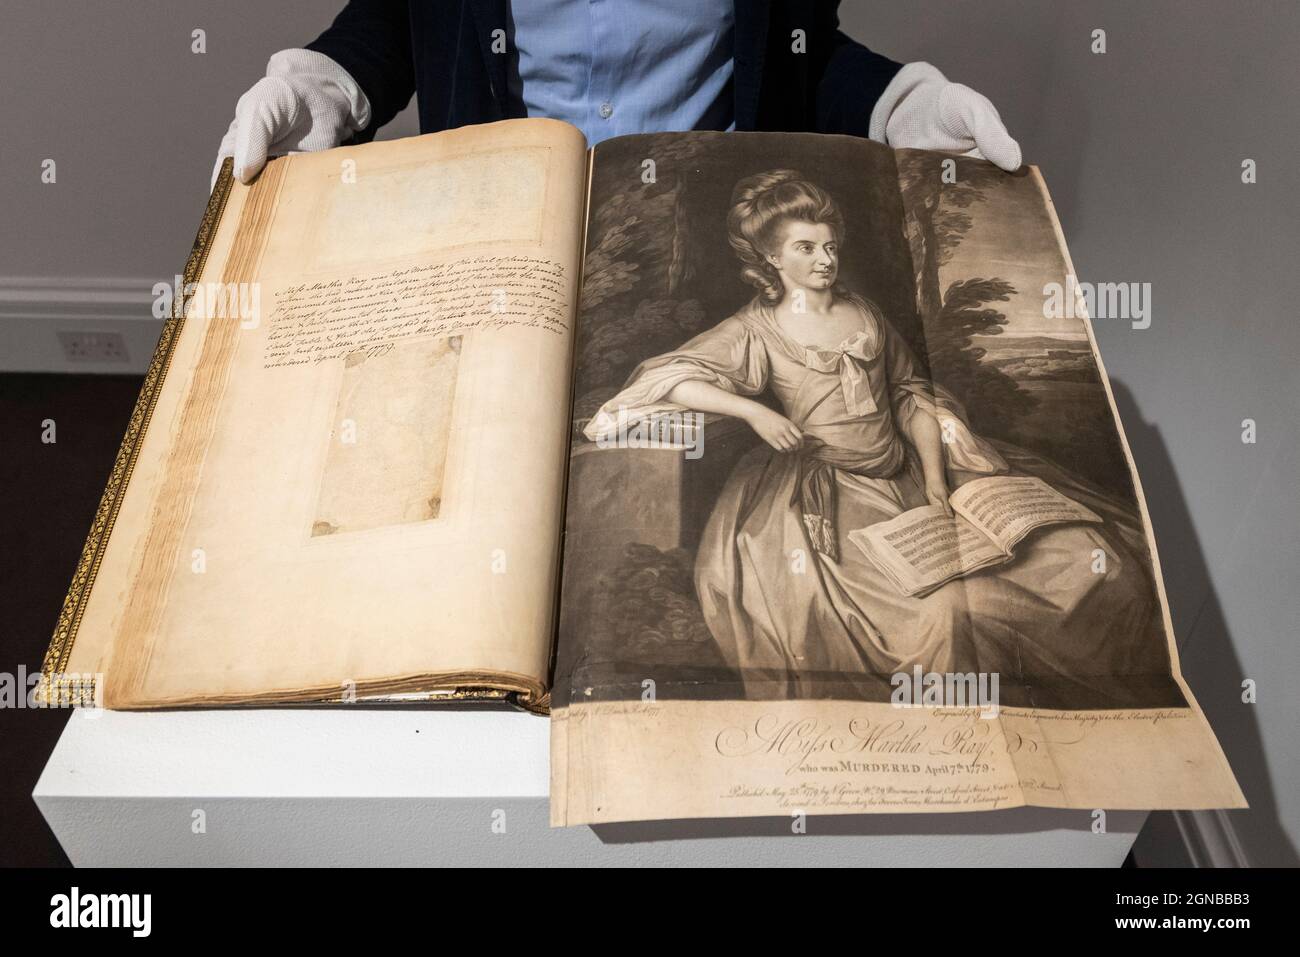 London, UK.  24 September 2021. A technician presents one of two volumes called 'Remarkable Characters' (Est $100,000-150,000), containing 460 prints brought together by WIlliam Esdaile, the most important print collector of his day. Preview of a collection spanning the history of magic from celebrity magician Ricky Jay.  The works are being shown in Sotheby’s, New Bond Street, ahead of their auction in New York on 27 and 28 October. Credit: Stephen Chung / Alamy Live News Stock Photo